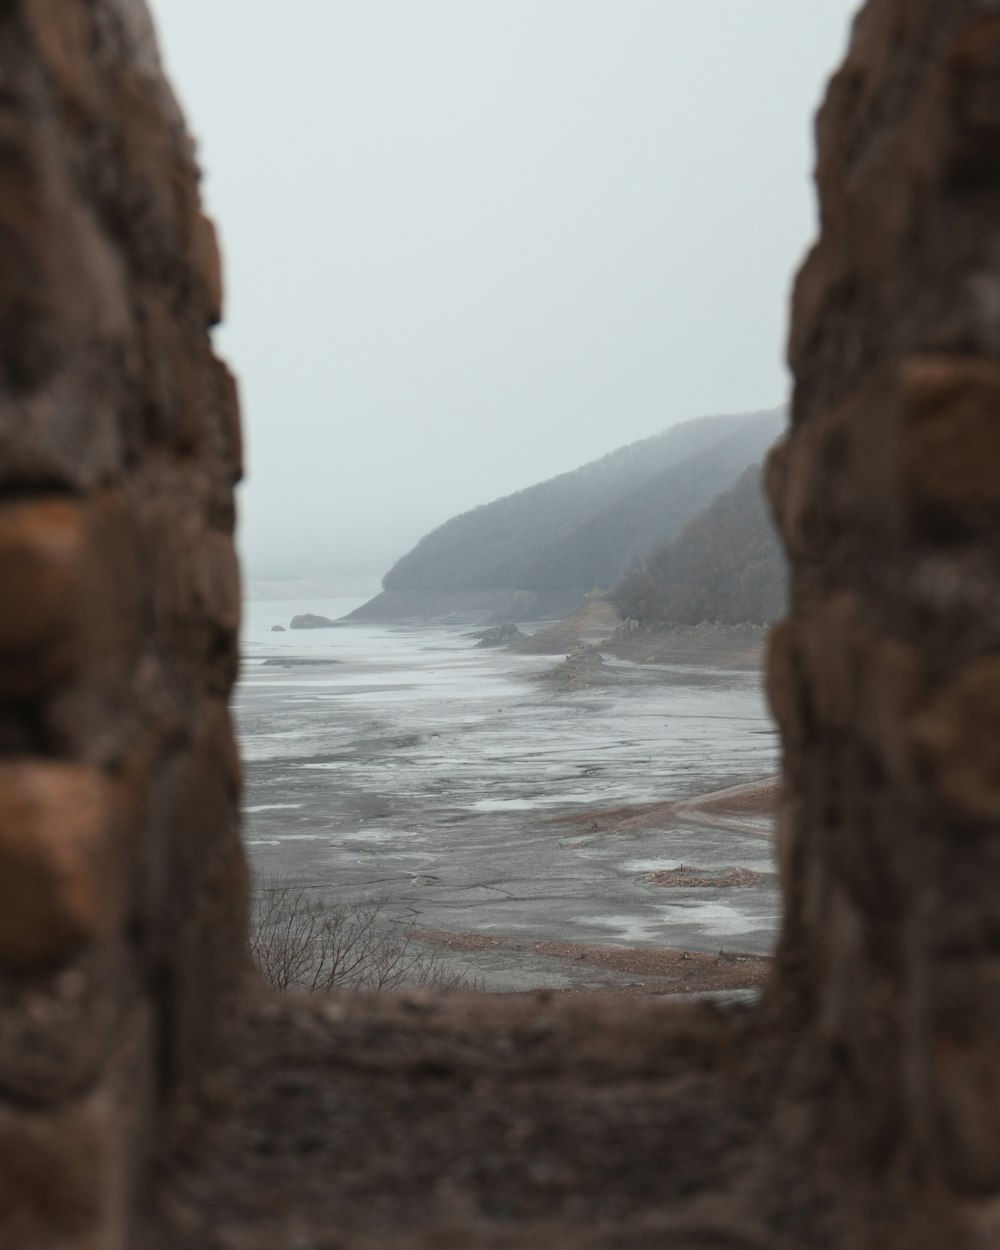 a view of a body of water through a stone wall